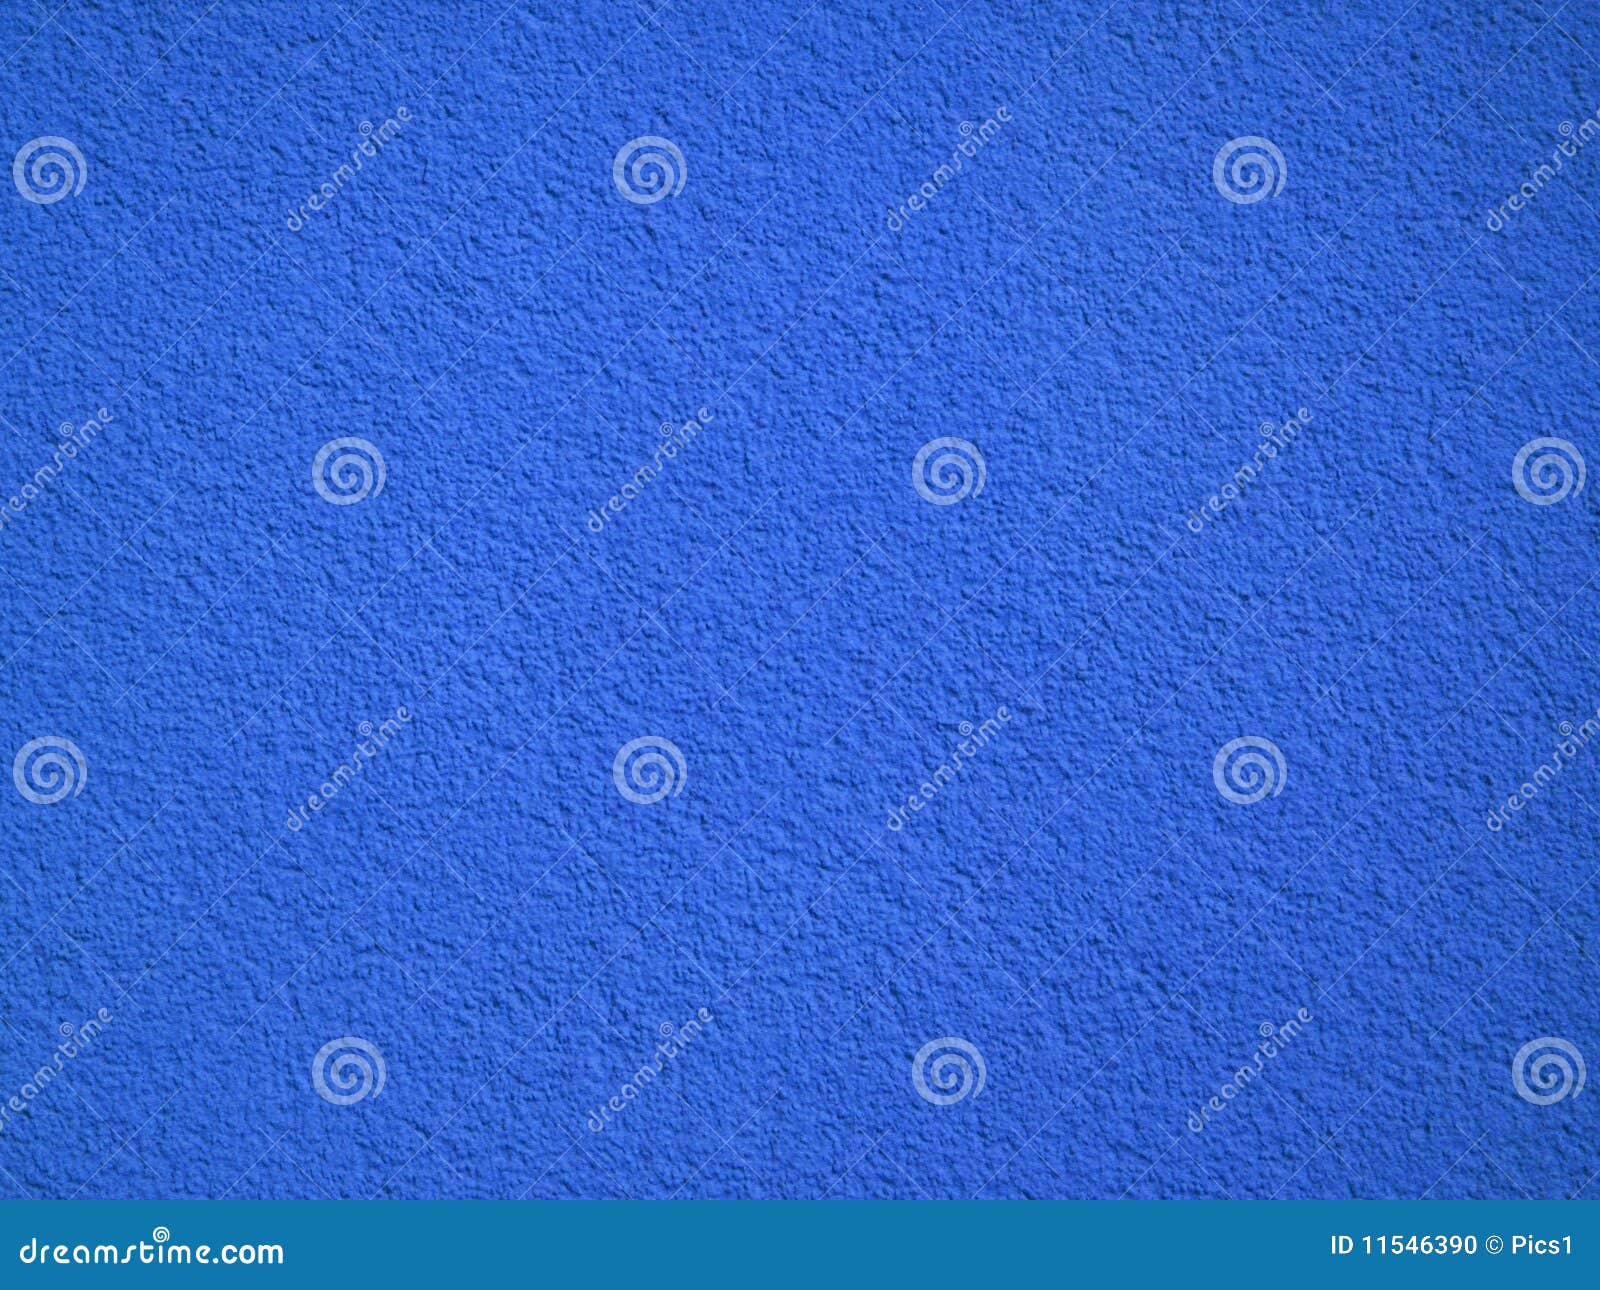 Blue wall of a house stock photo. Image of rough, painting - 11546390